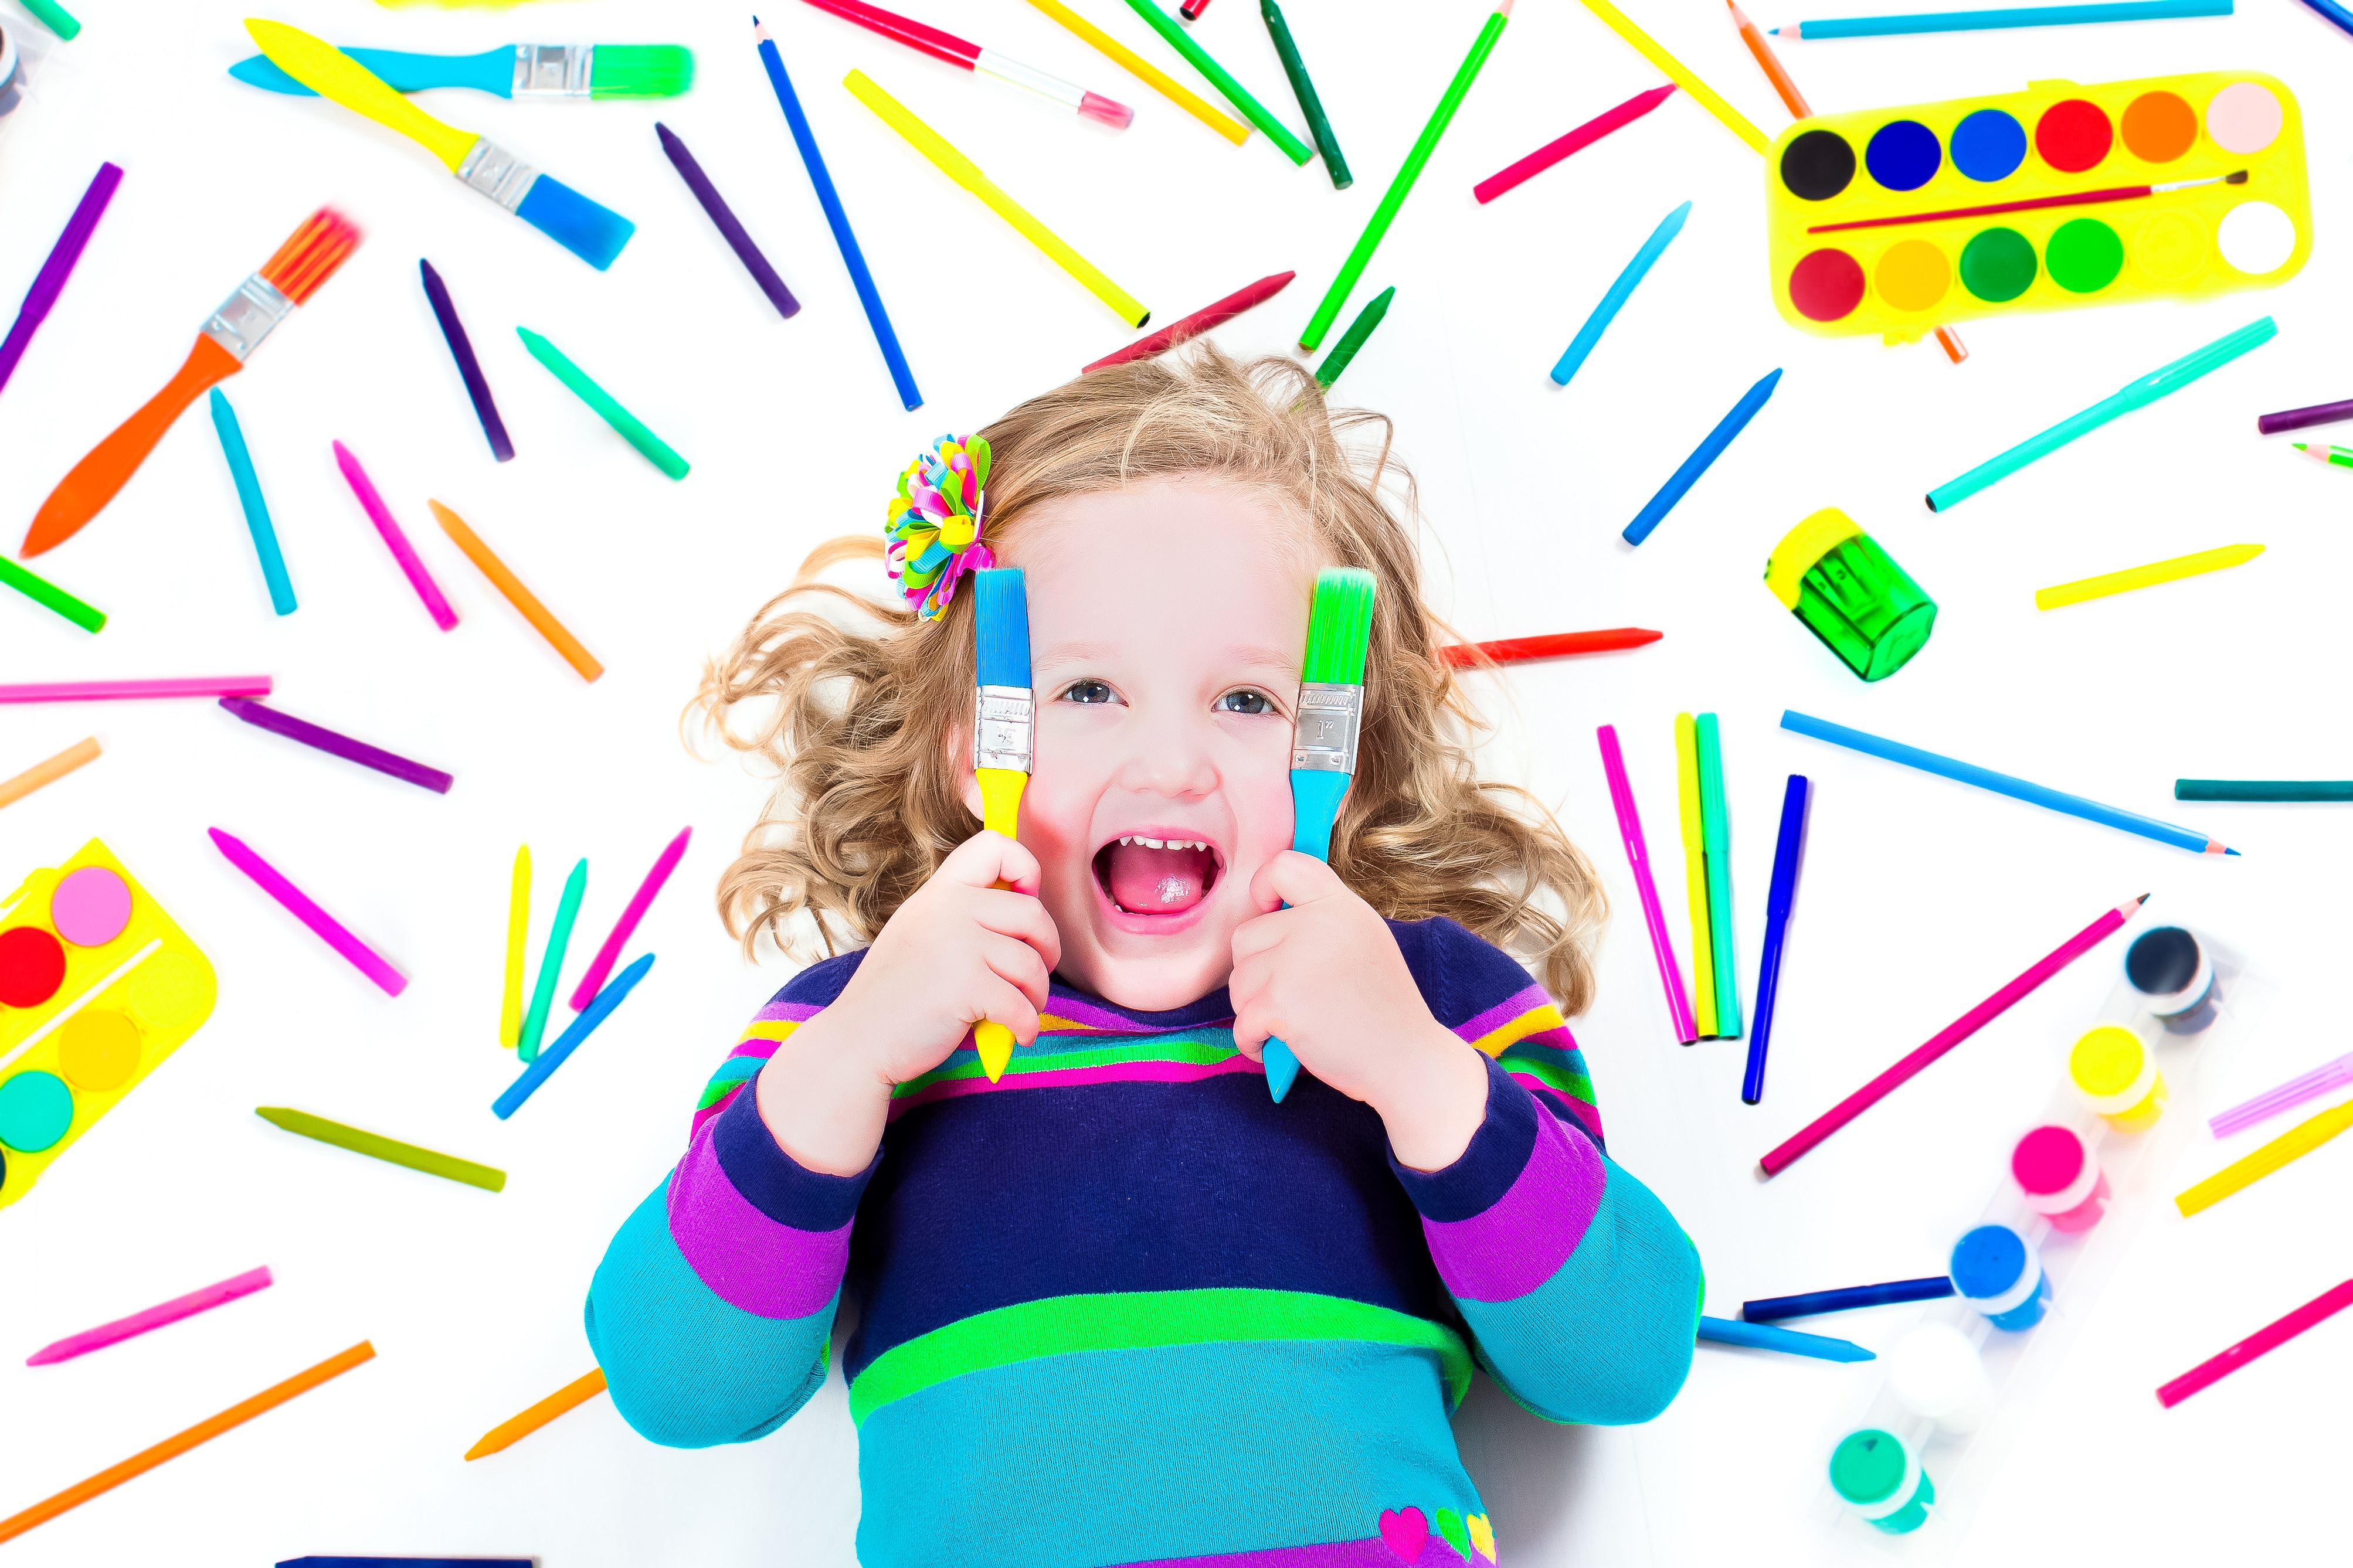 The Best Arts & Crafts Supplies & Gift Ideas For Kids – From Toddlers to Teens